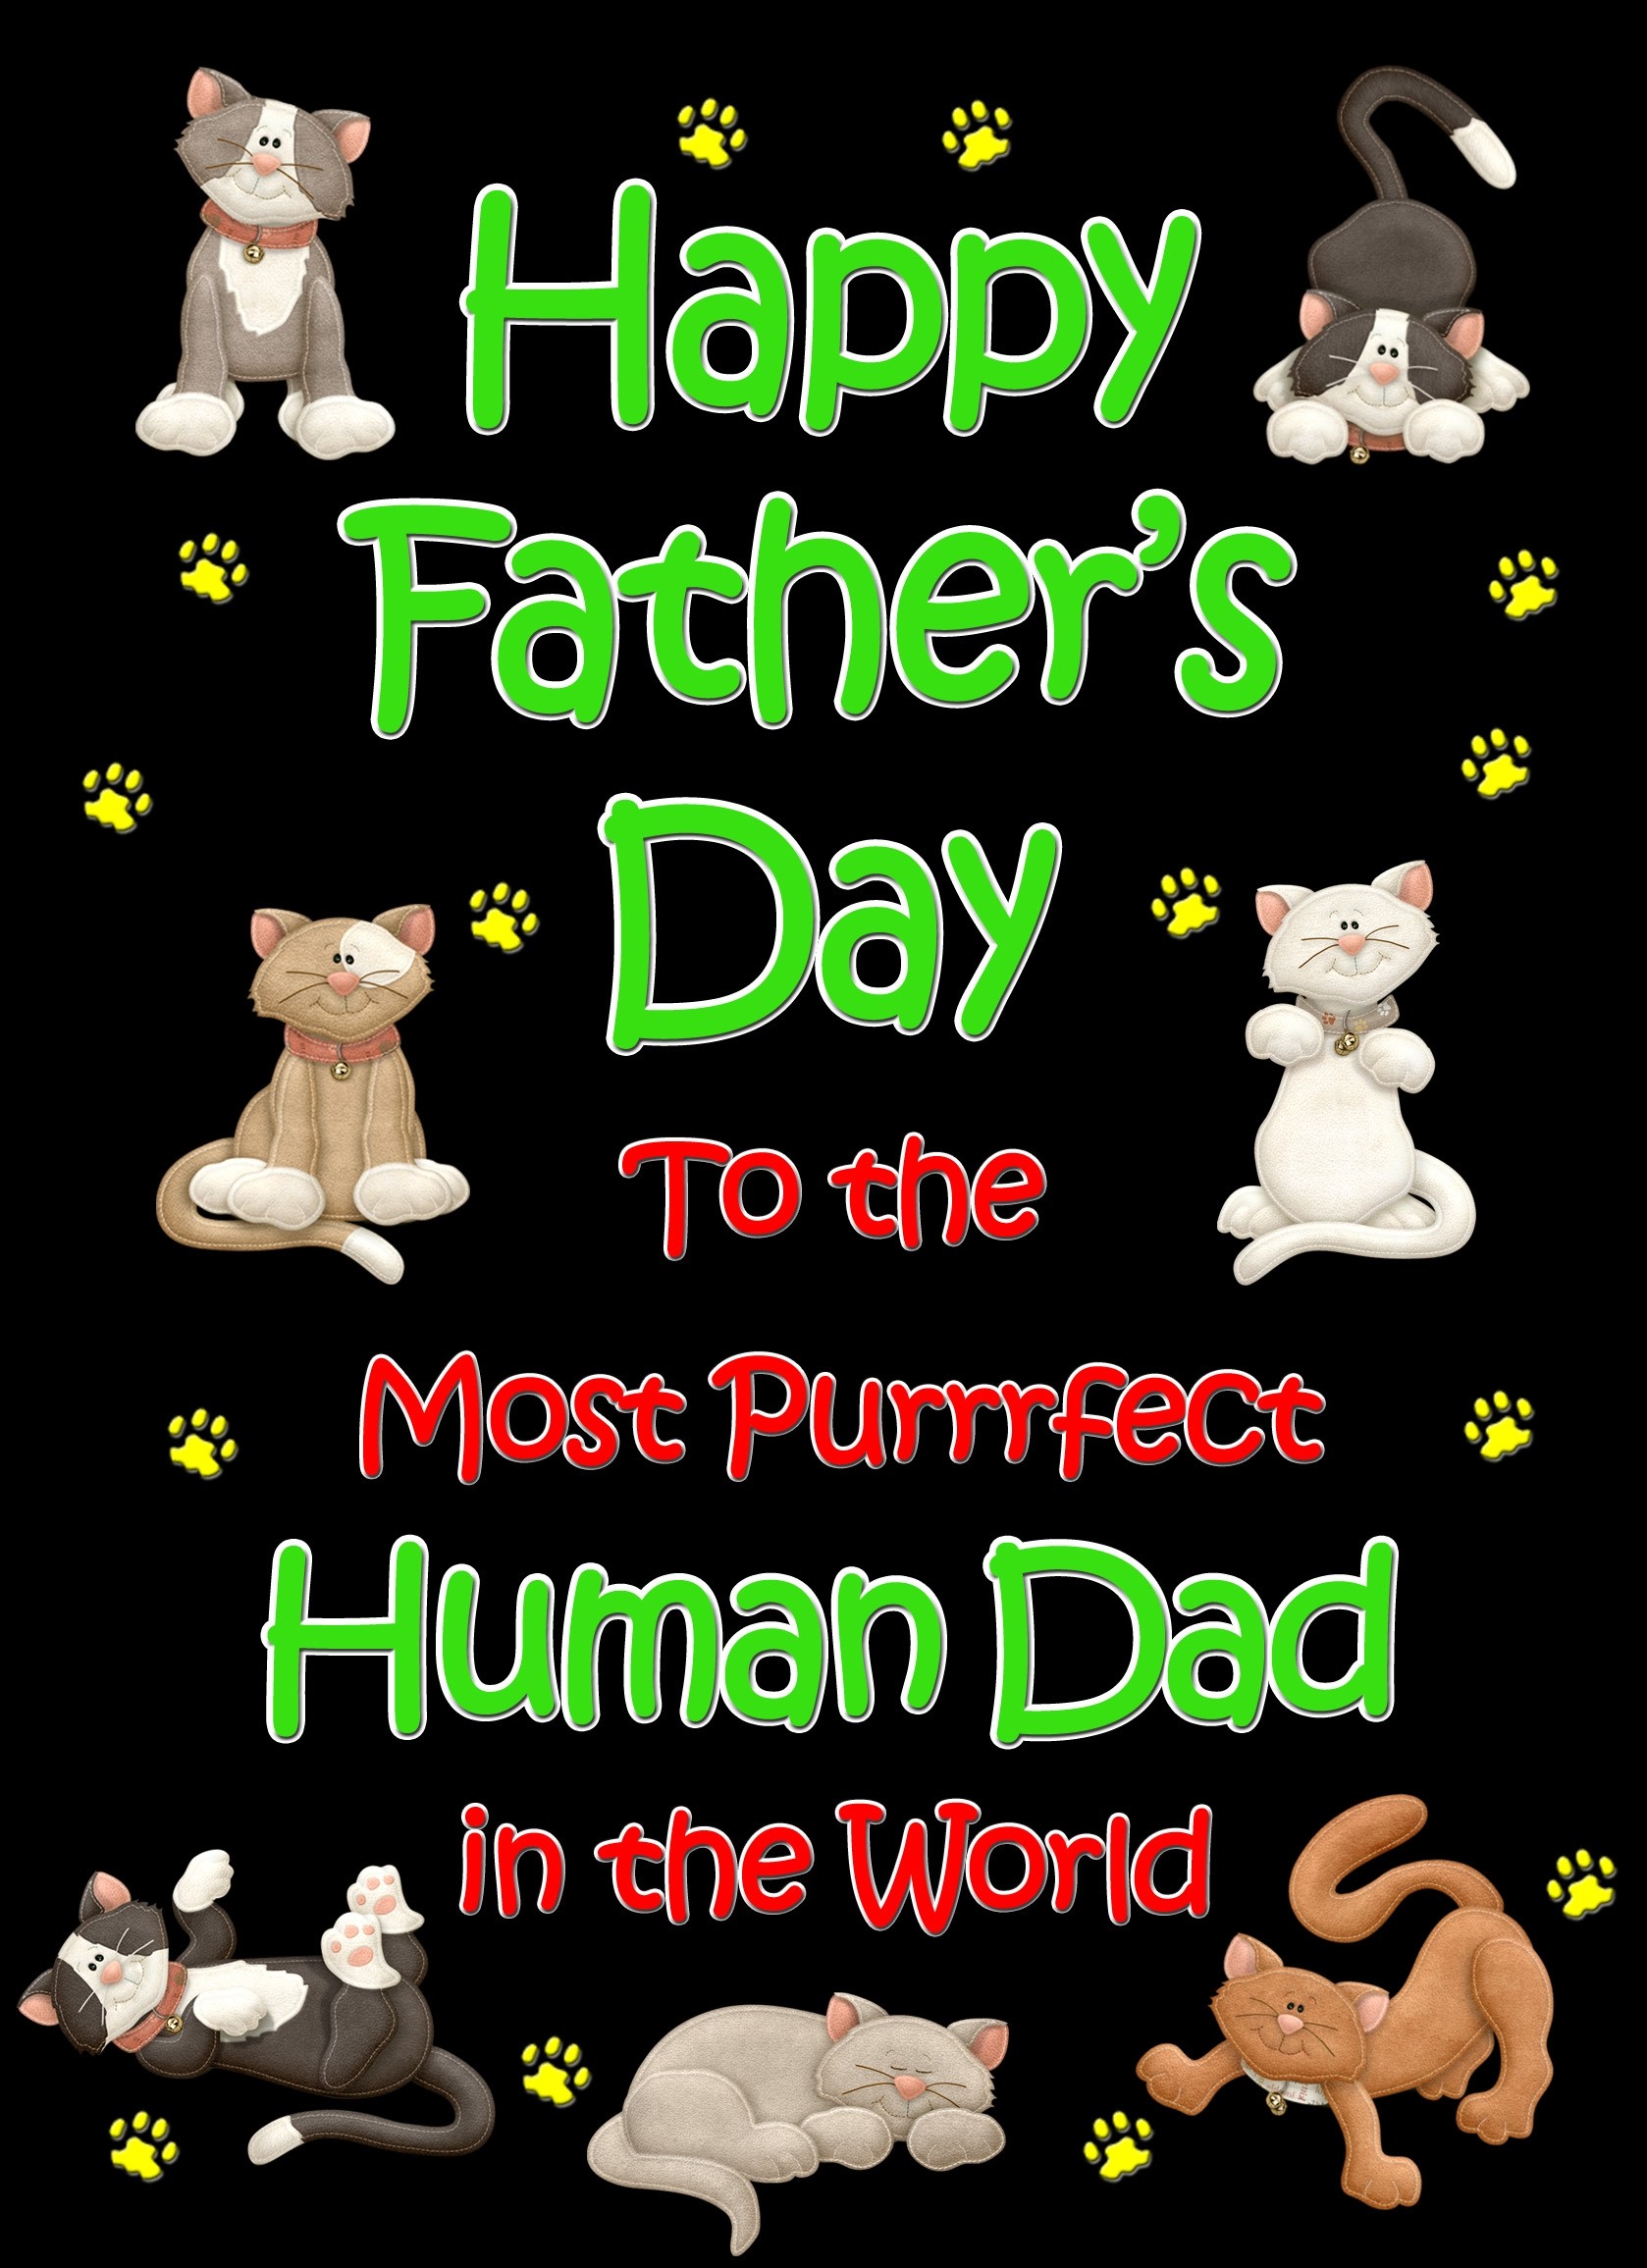 From The Cat Fathers Day Card (Black, Purrrfect Human Dad)